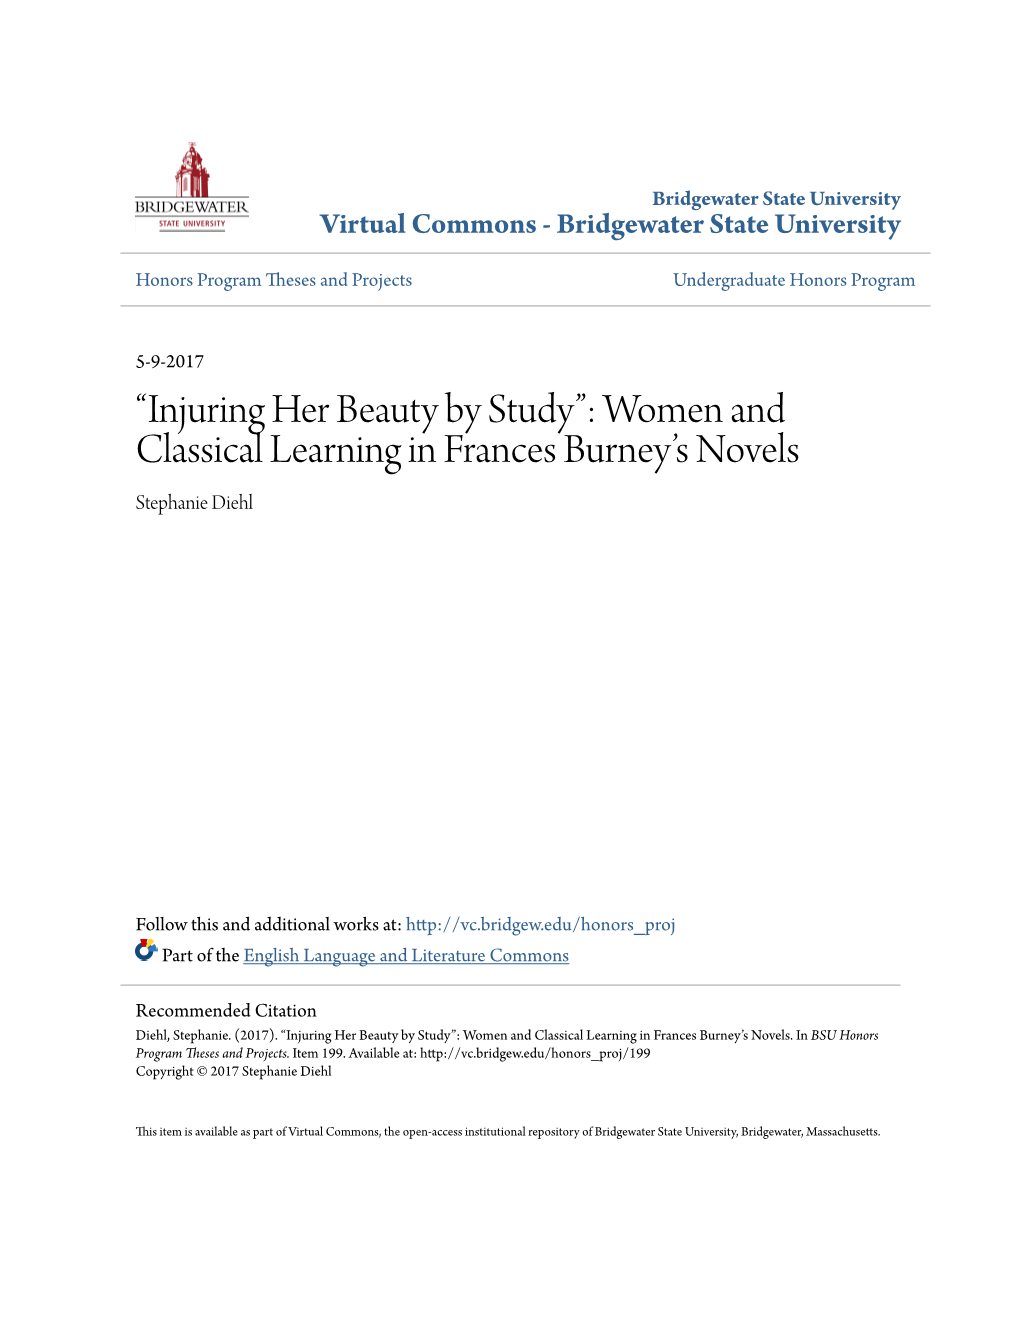 Women and Classical Learning in Frances Burney's Novels